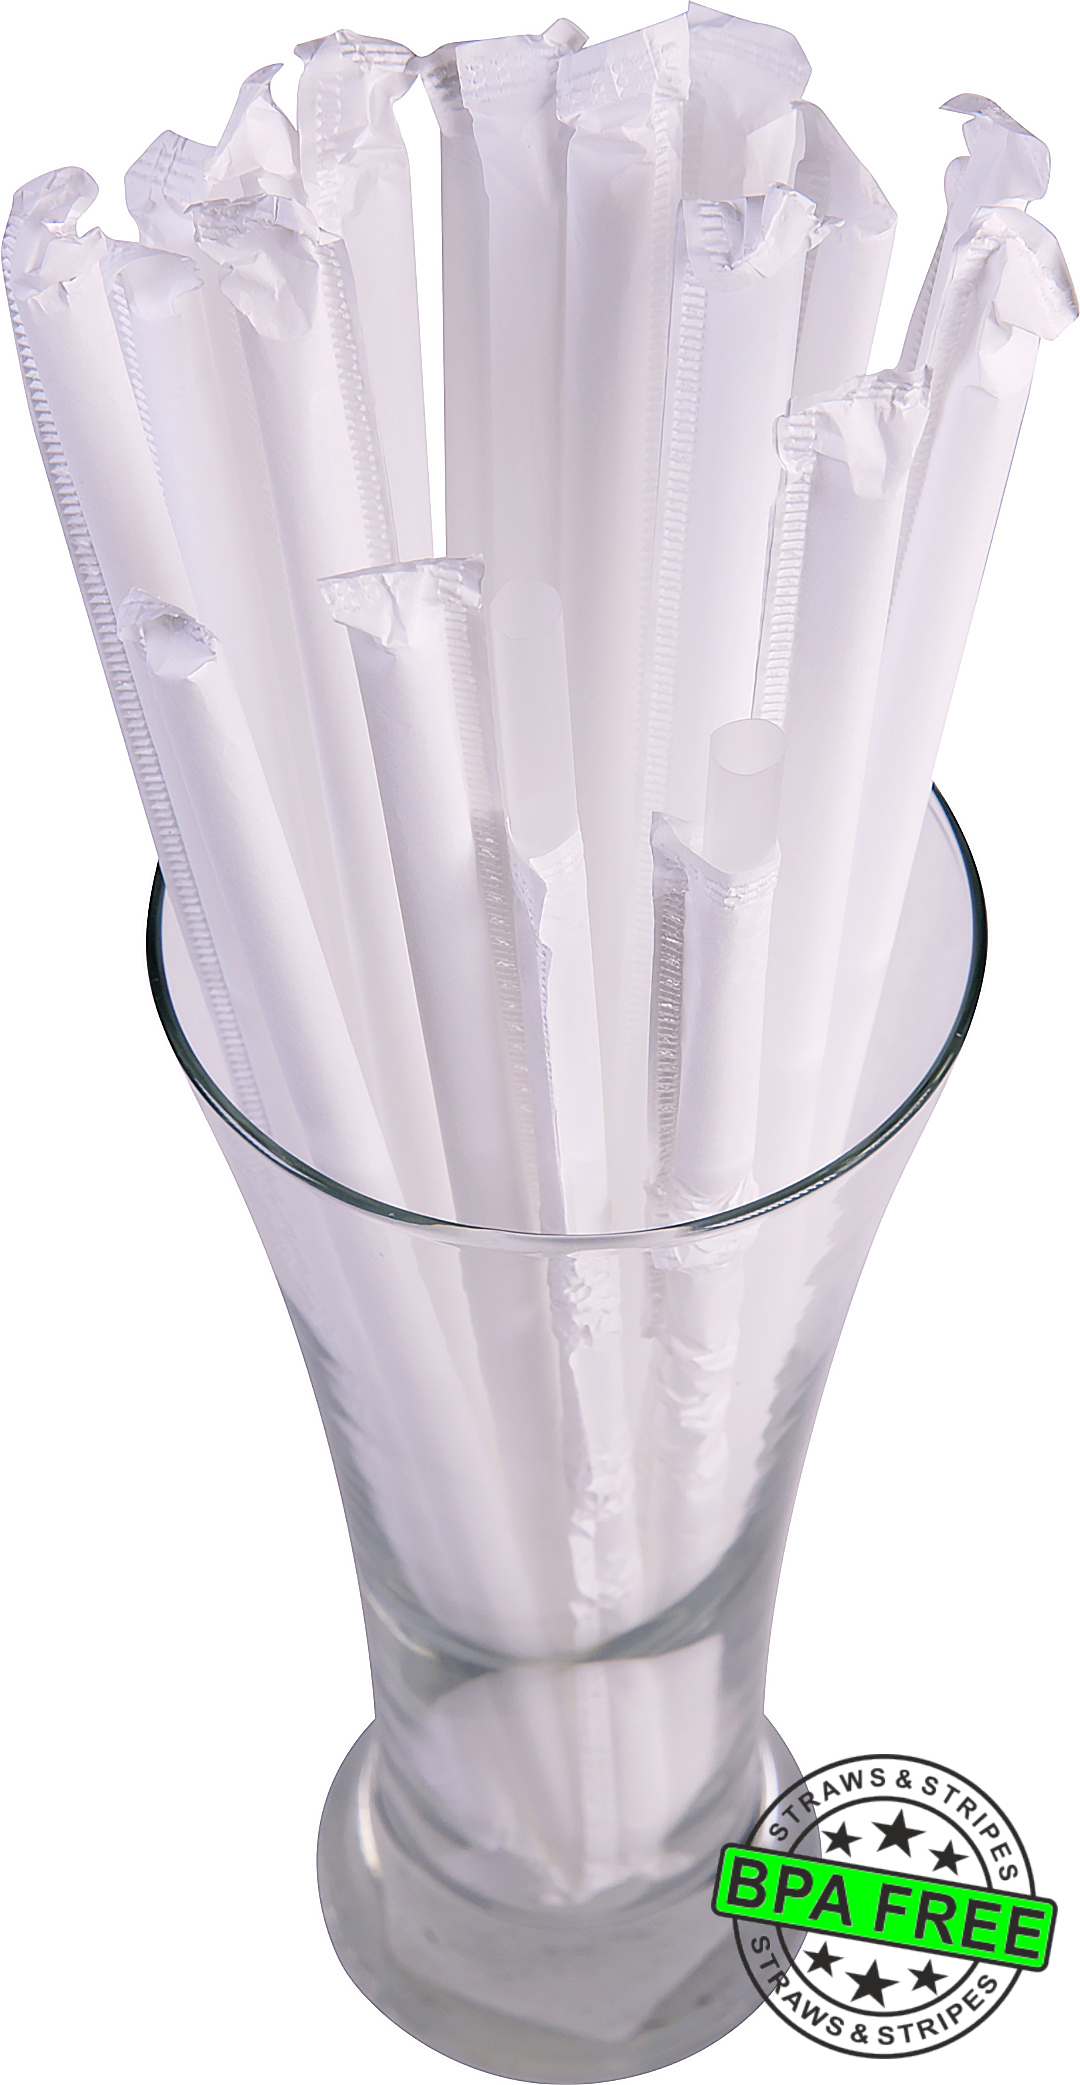 1 CASE - 2,500 (10x250) PAPER WRAPPED SMOOTHIE drinking straws 10 x 0.28 inch - color: clear